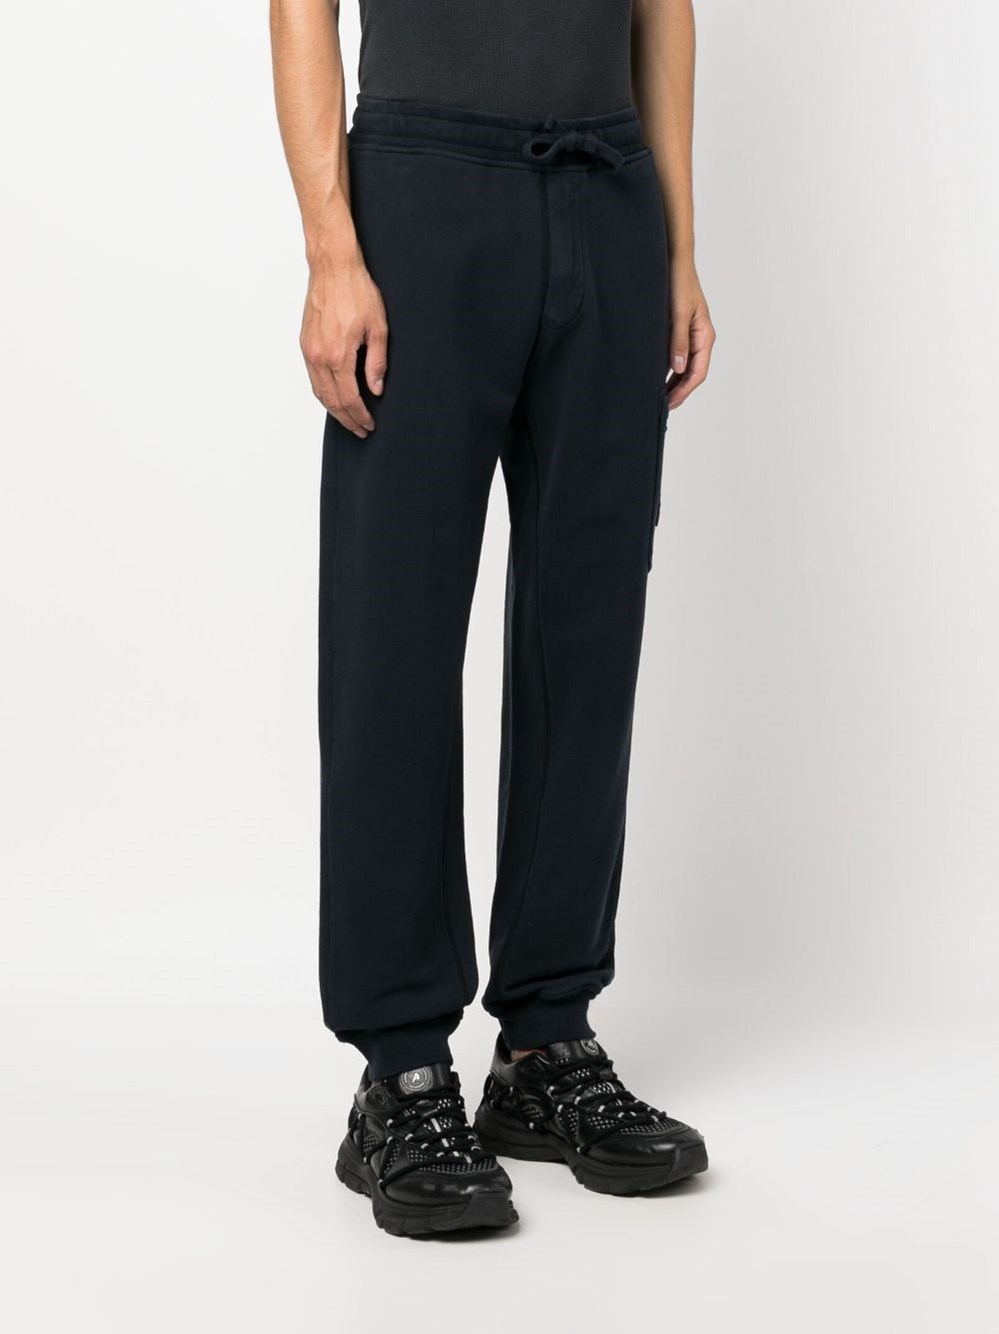 stone island JOGGERS available on montiboutique.com - 56267